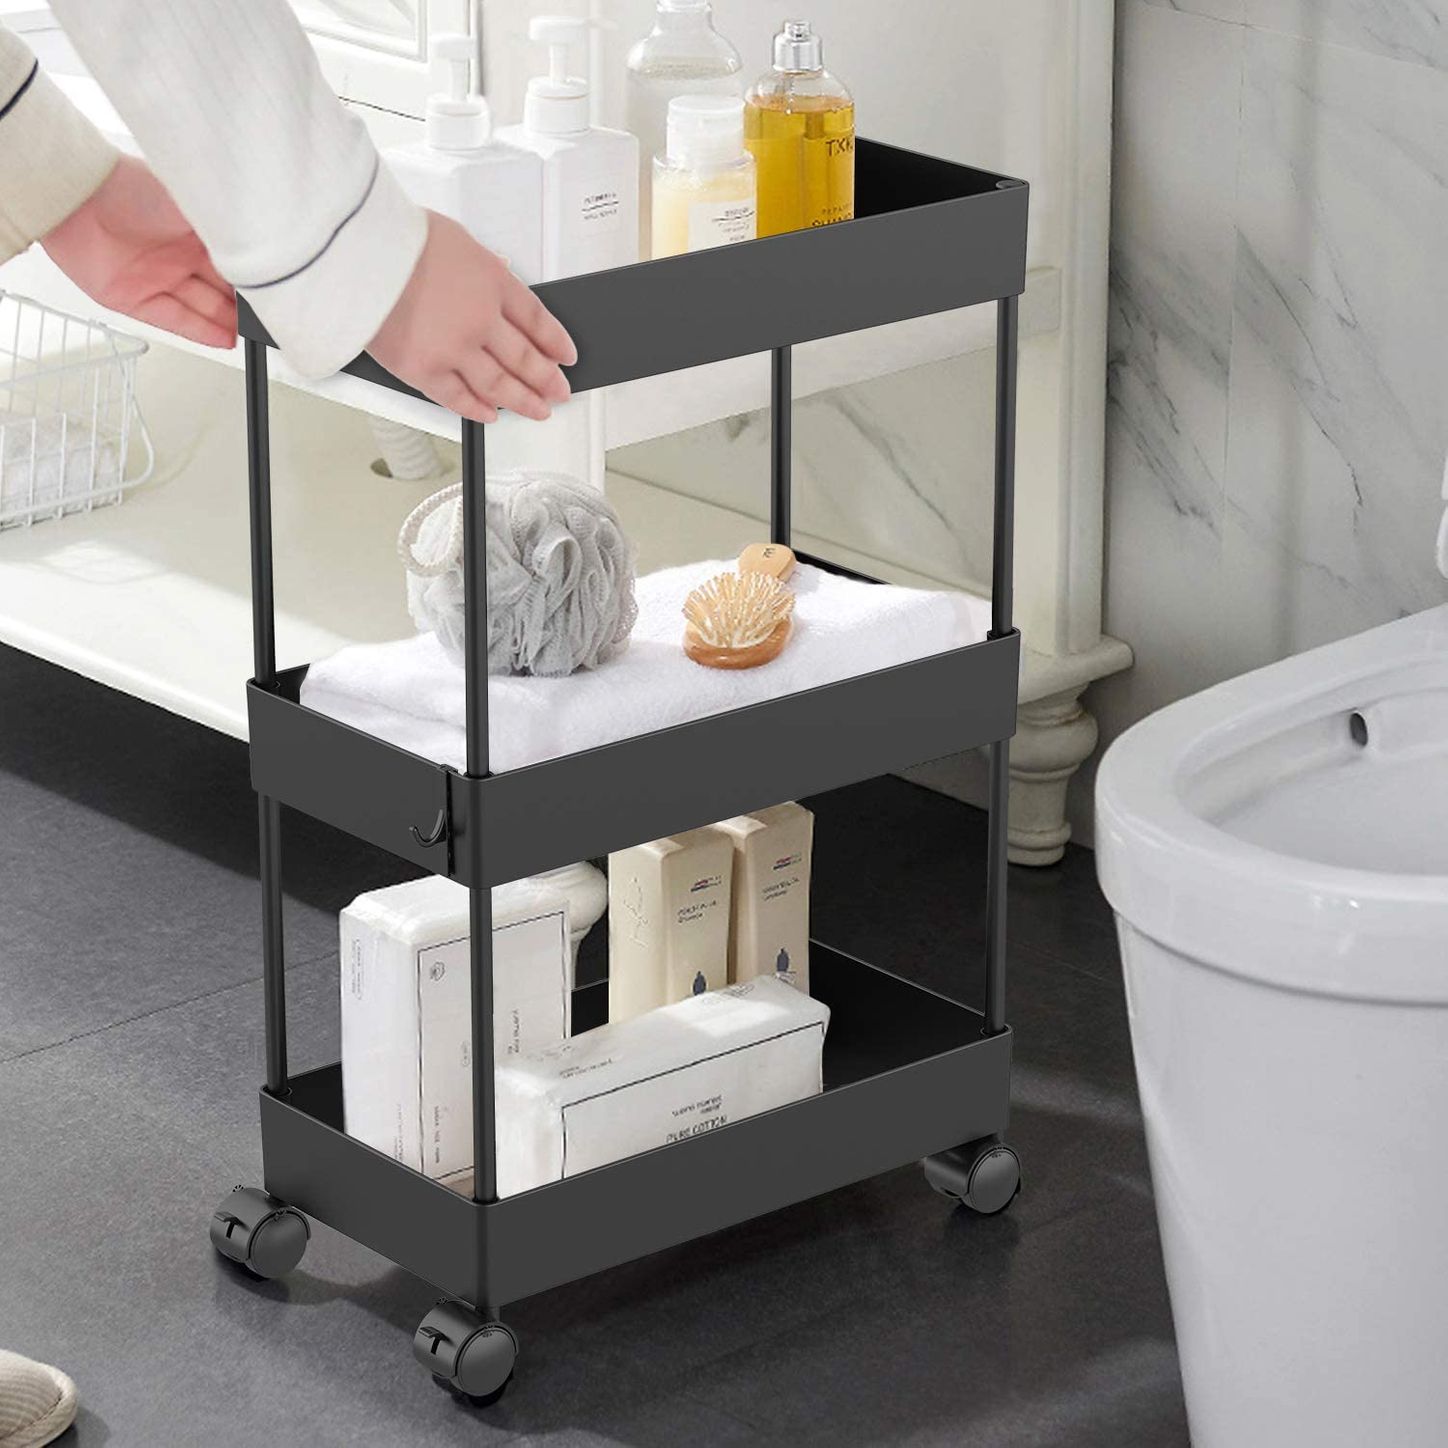 11 Bath Accessories for Seniors That Make Cleanliness Easy